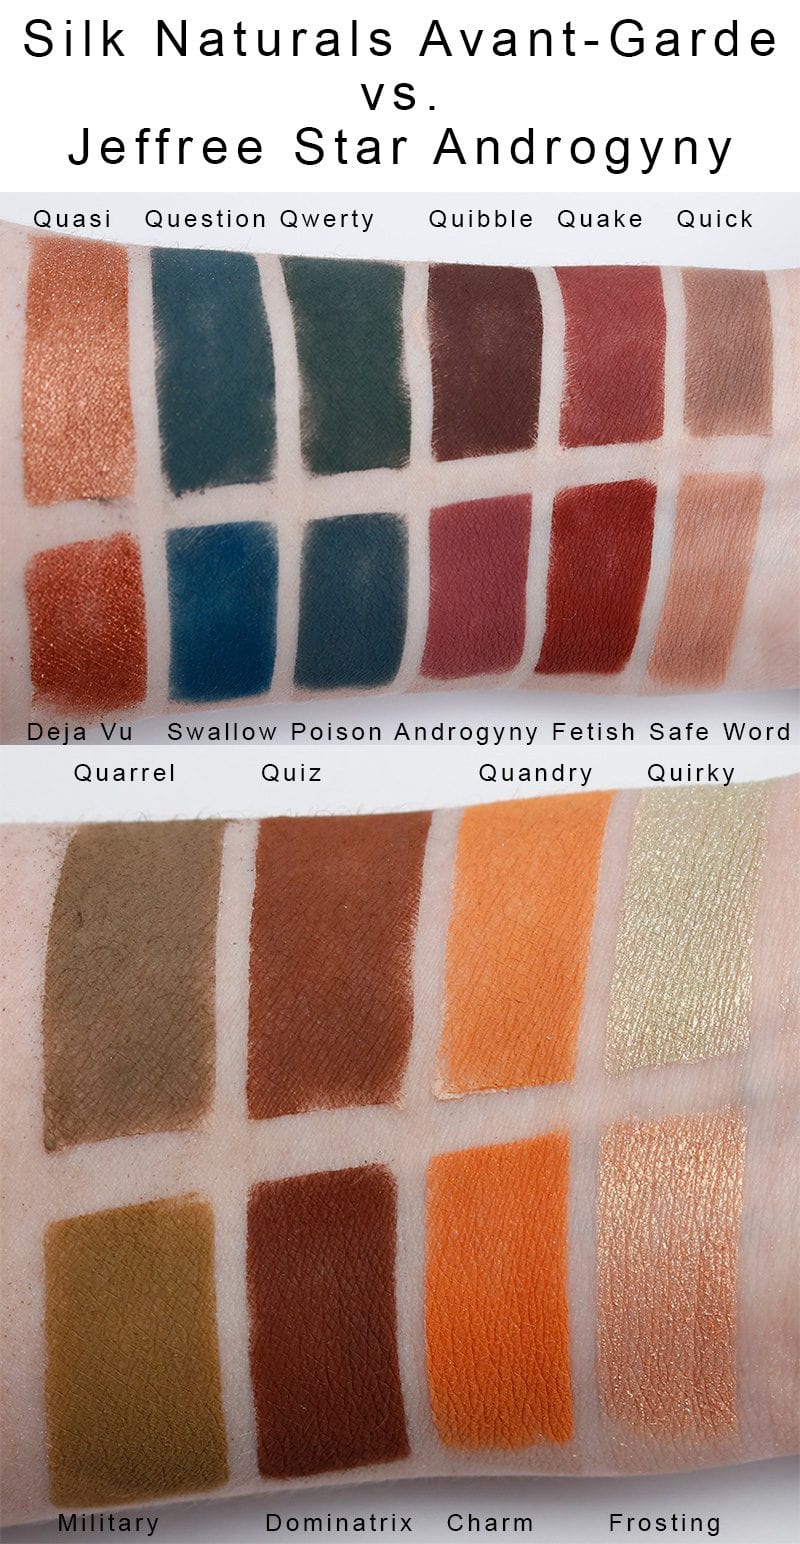 Silk Naturals Avant-Garde Palette vs. Jeffree Star Androgyny Palette dupes swatches from Phyrra.net